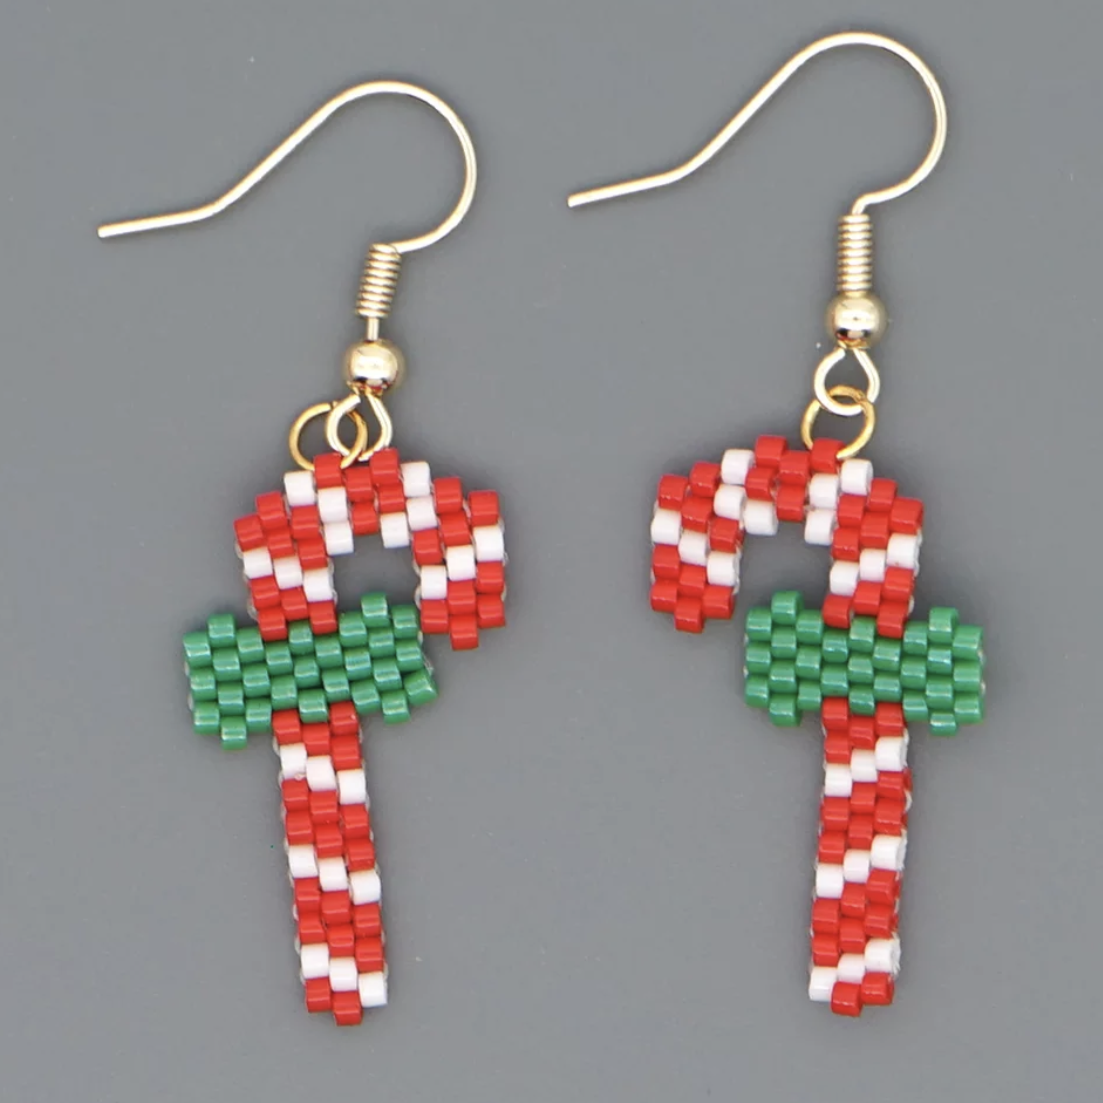 Stainless Steel Candy Cane Earrings